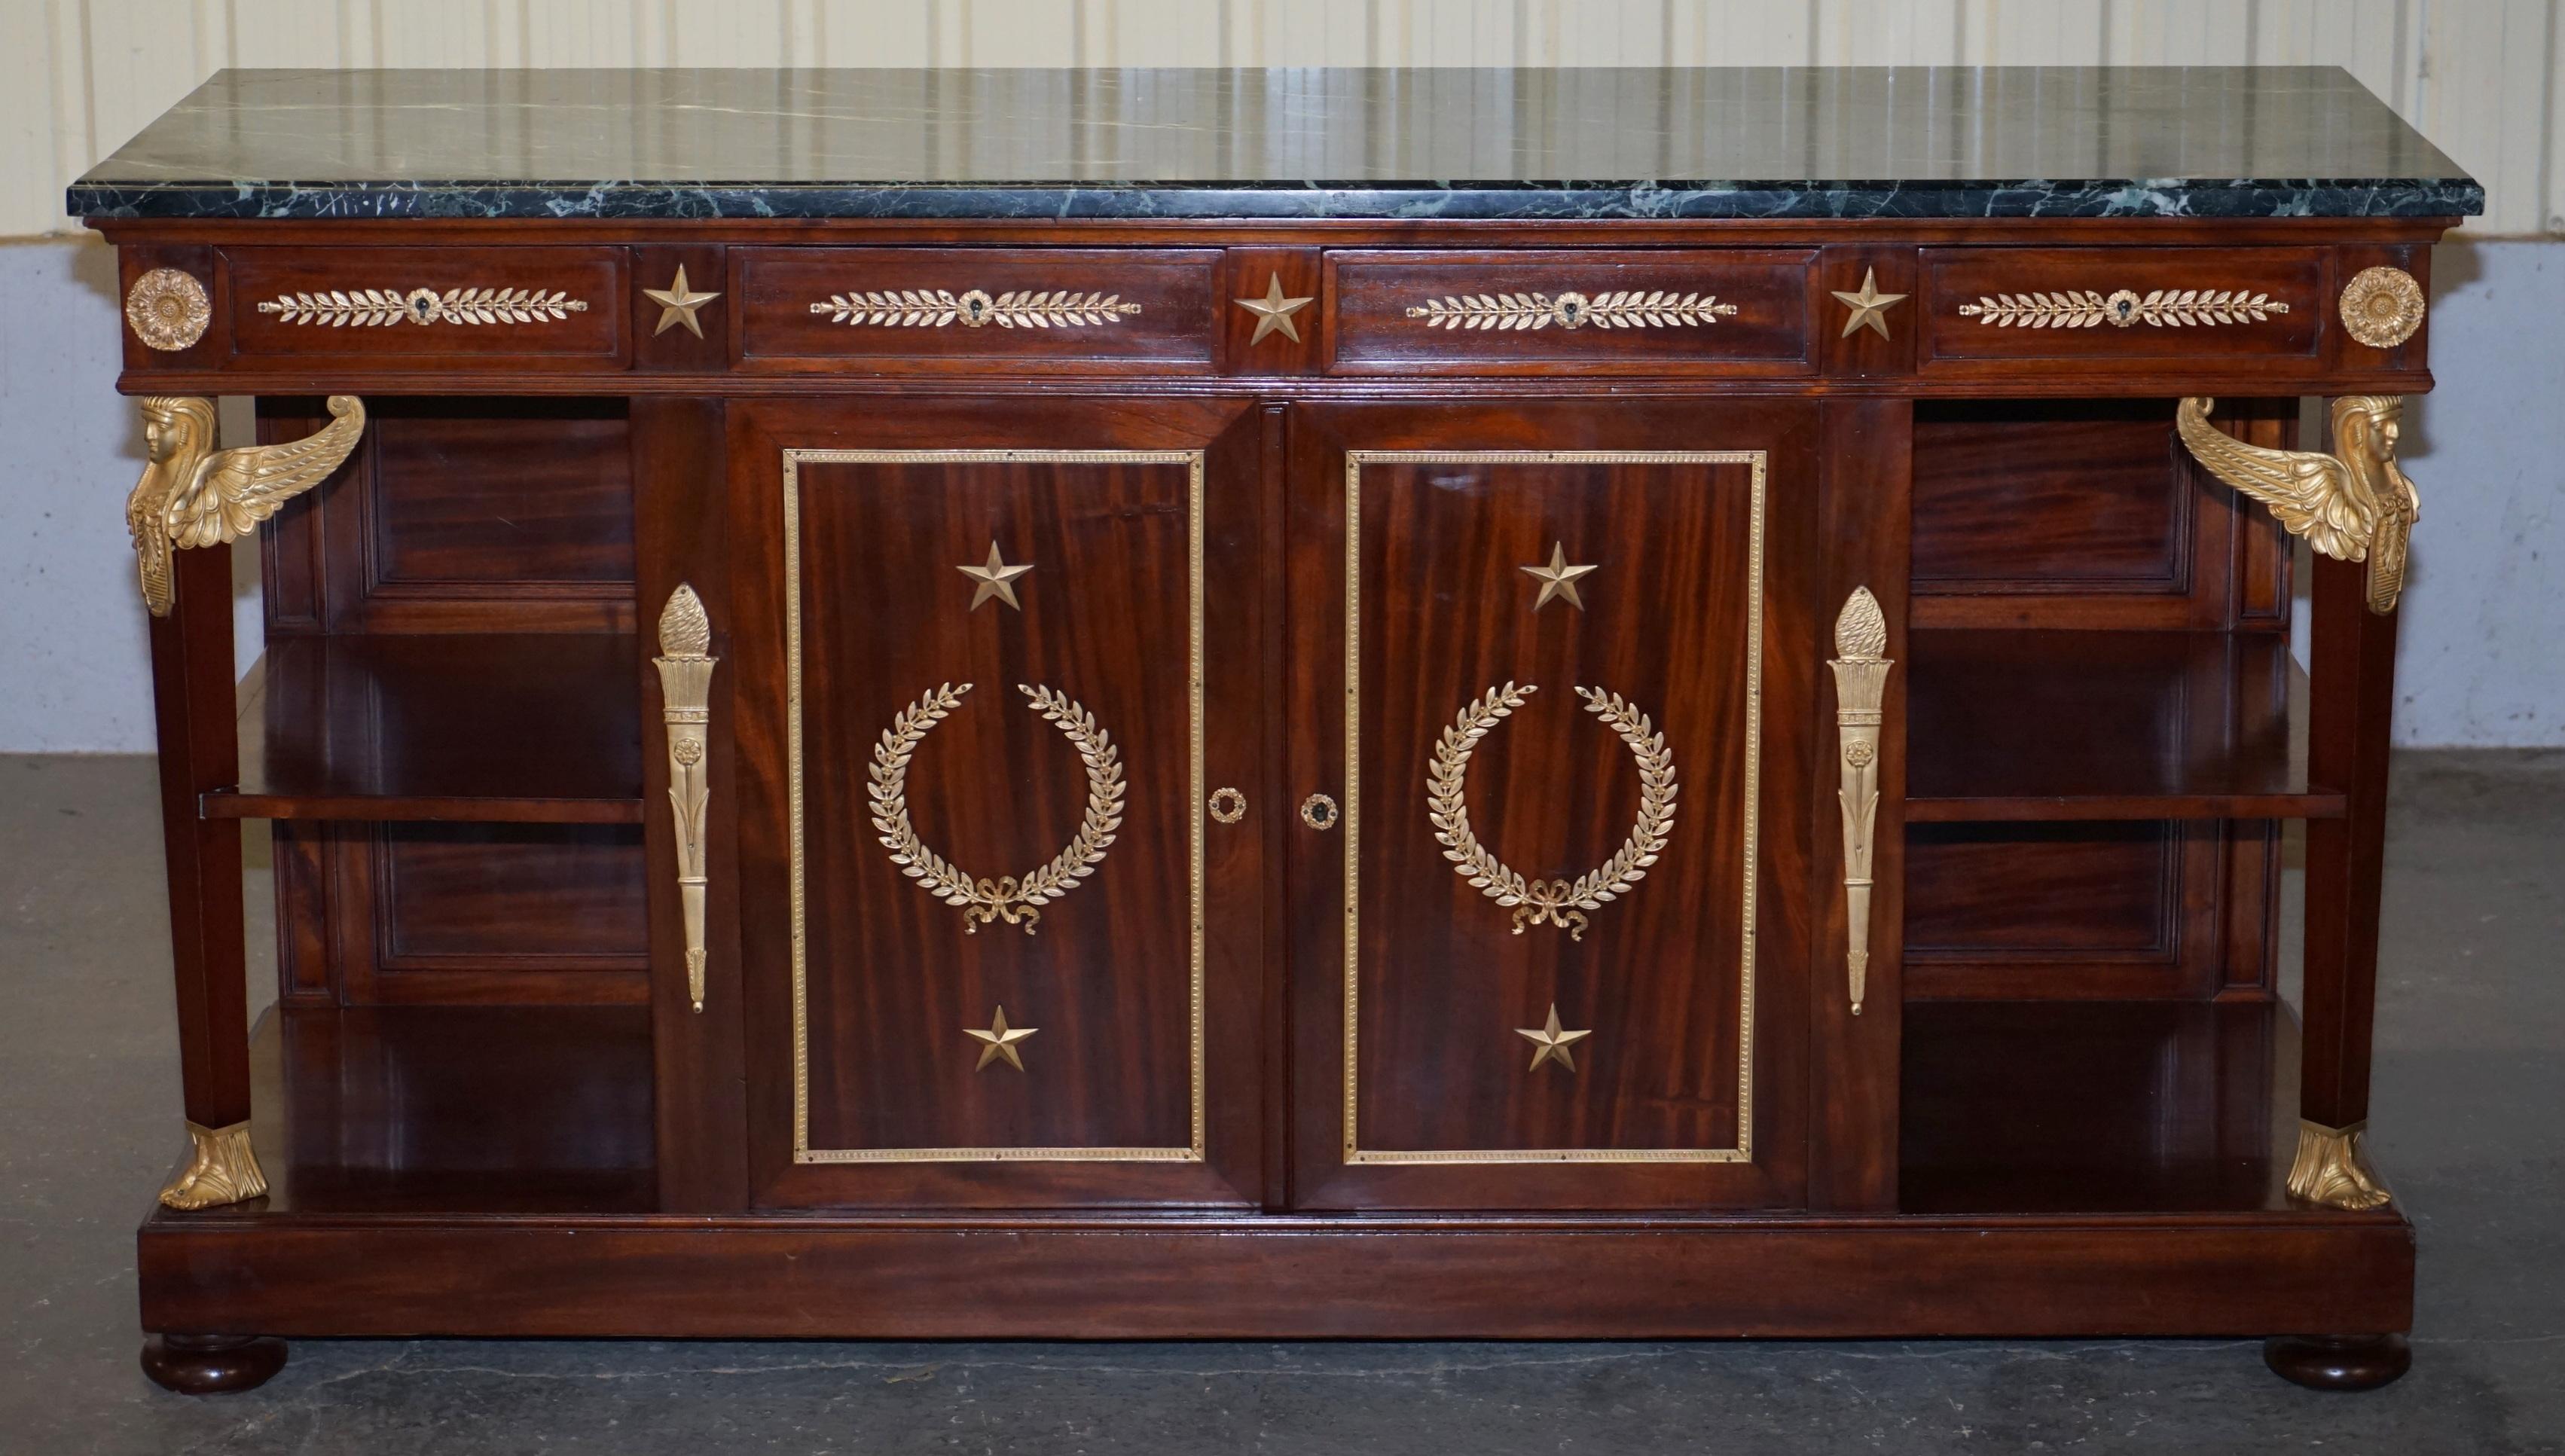 We are delighted to offer for sale this very fine mahogany, gilt bronze marble topped sideboard in the French Napoleon III Empire style

This is exceptional quality, circa 1900, the frame is flamed mahogany, the metal work is gold gilt bronze, its